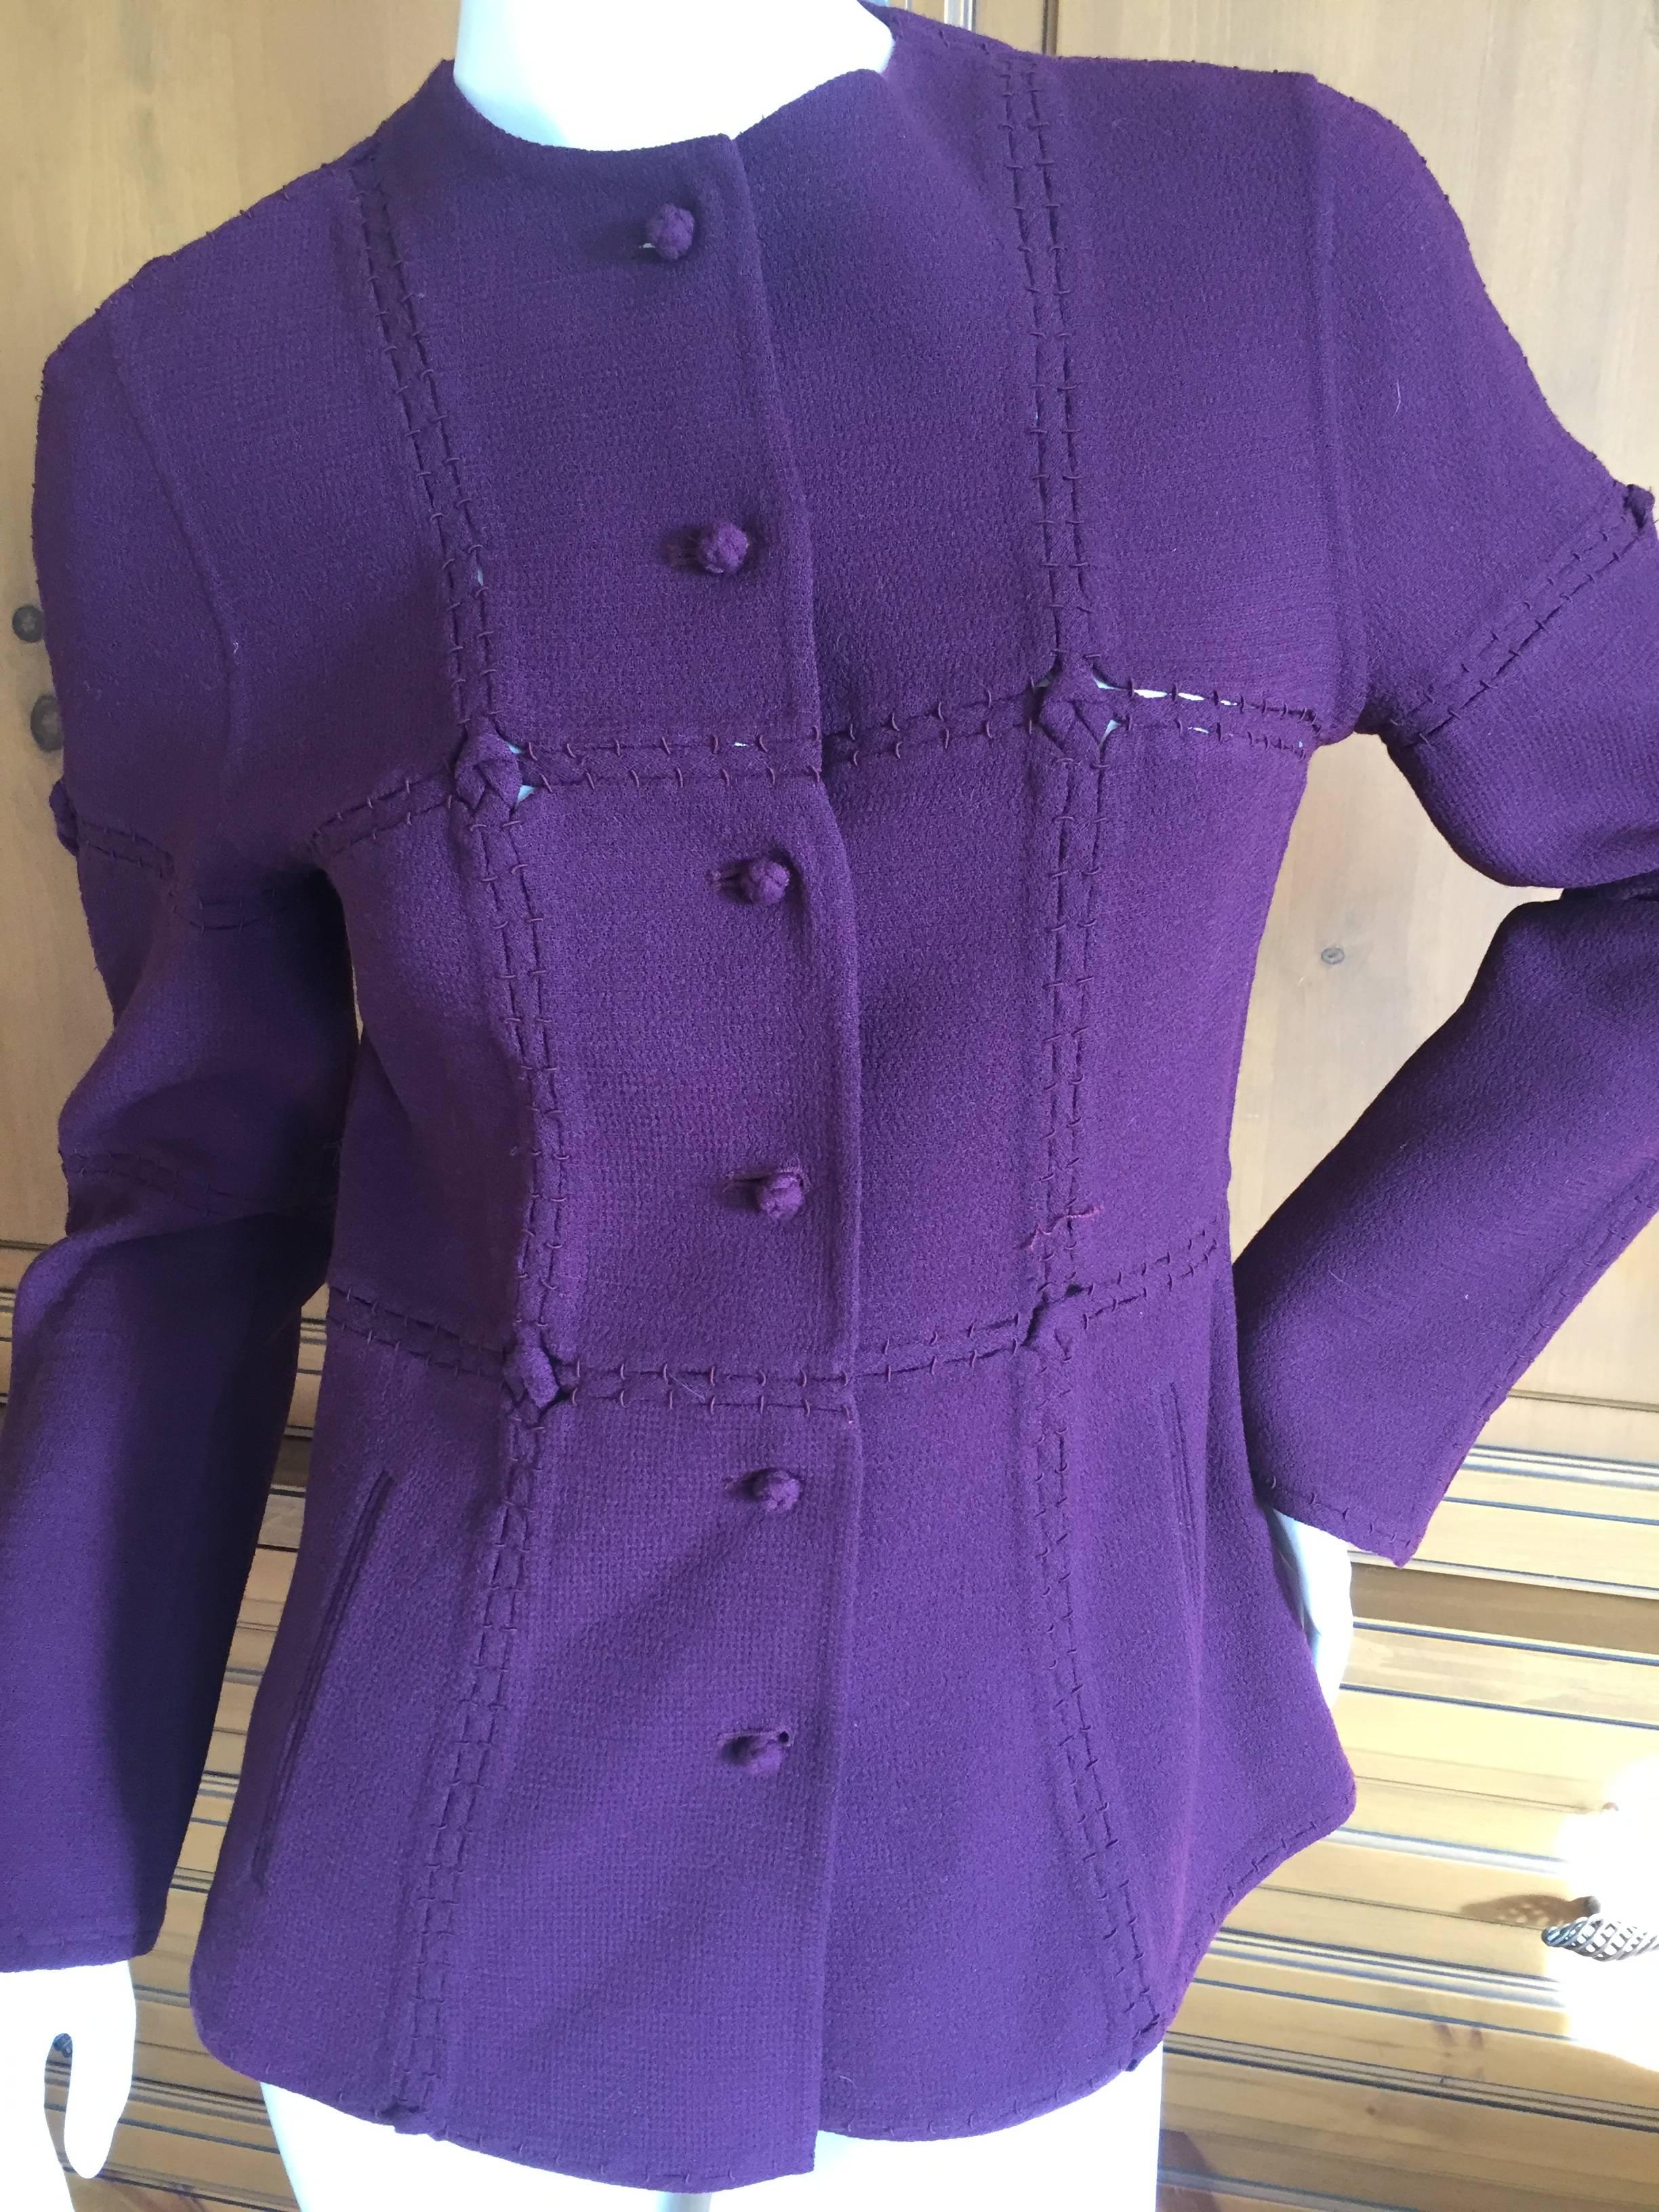 Chado Ralph Rucci Purple Jacket with Open Stitch Details  In Excellent Condition For Sale In Cloverdale, CA